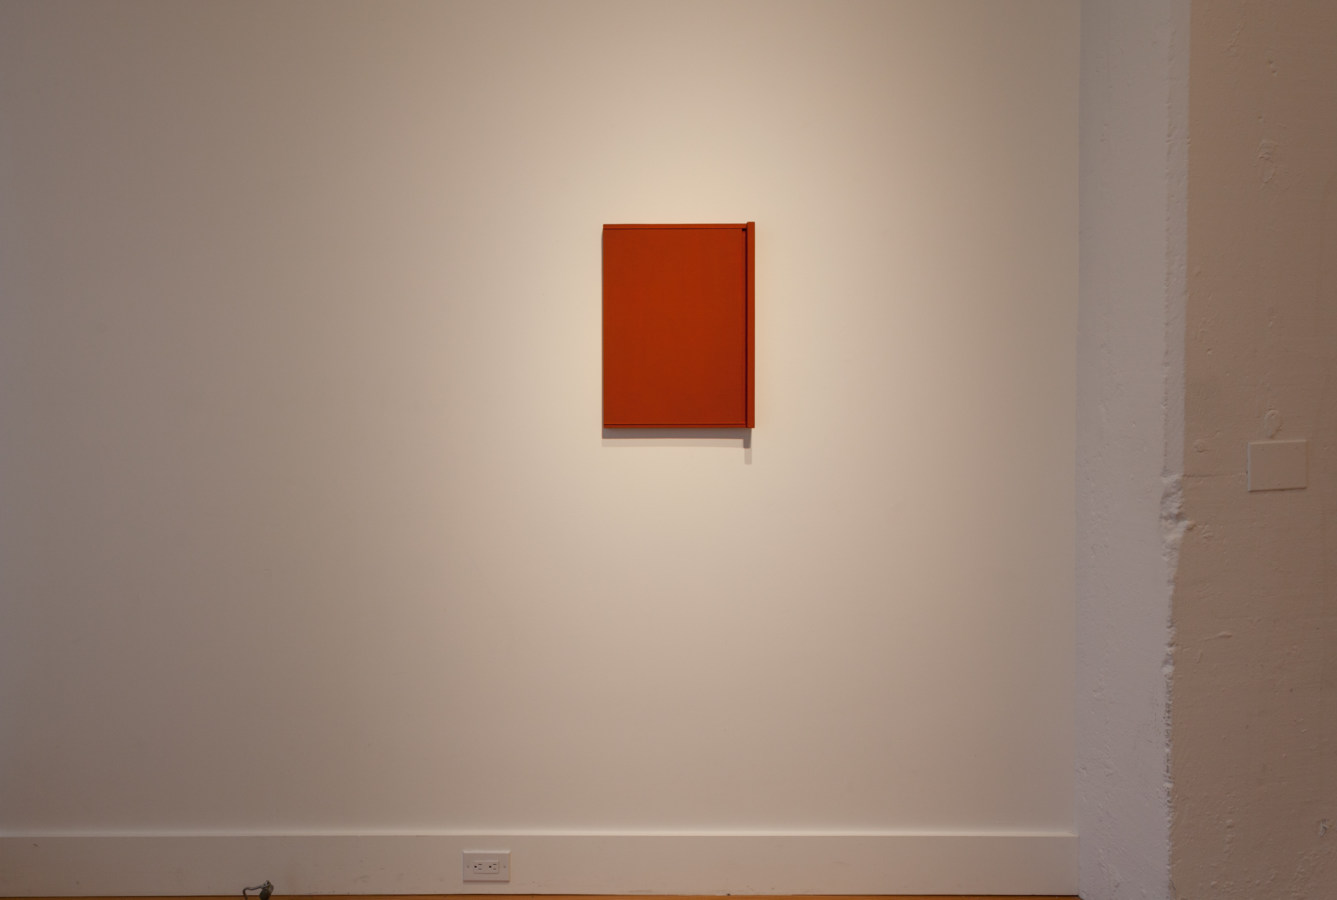 Installation photograph of a gallery space with a single red rectangle on the wall